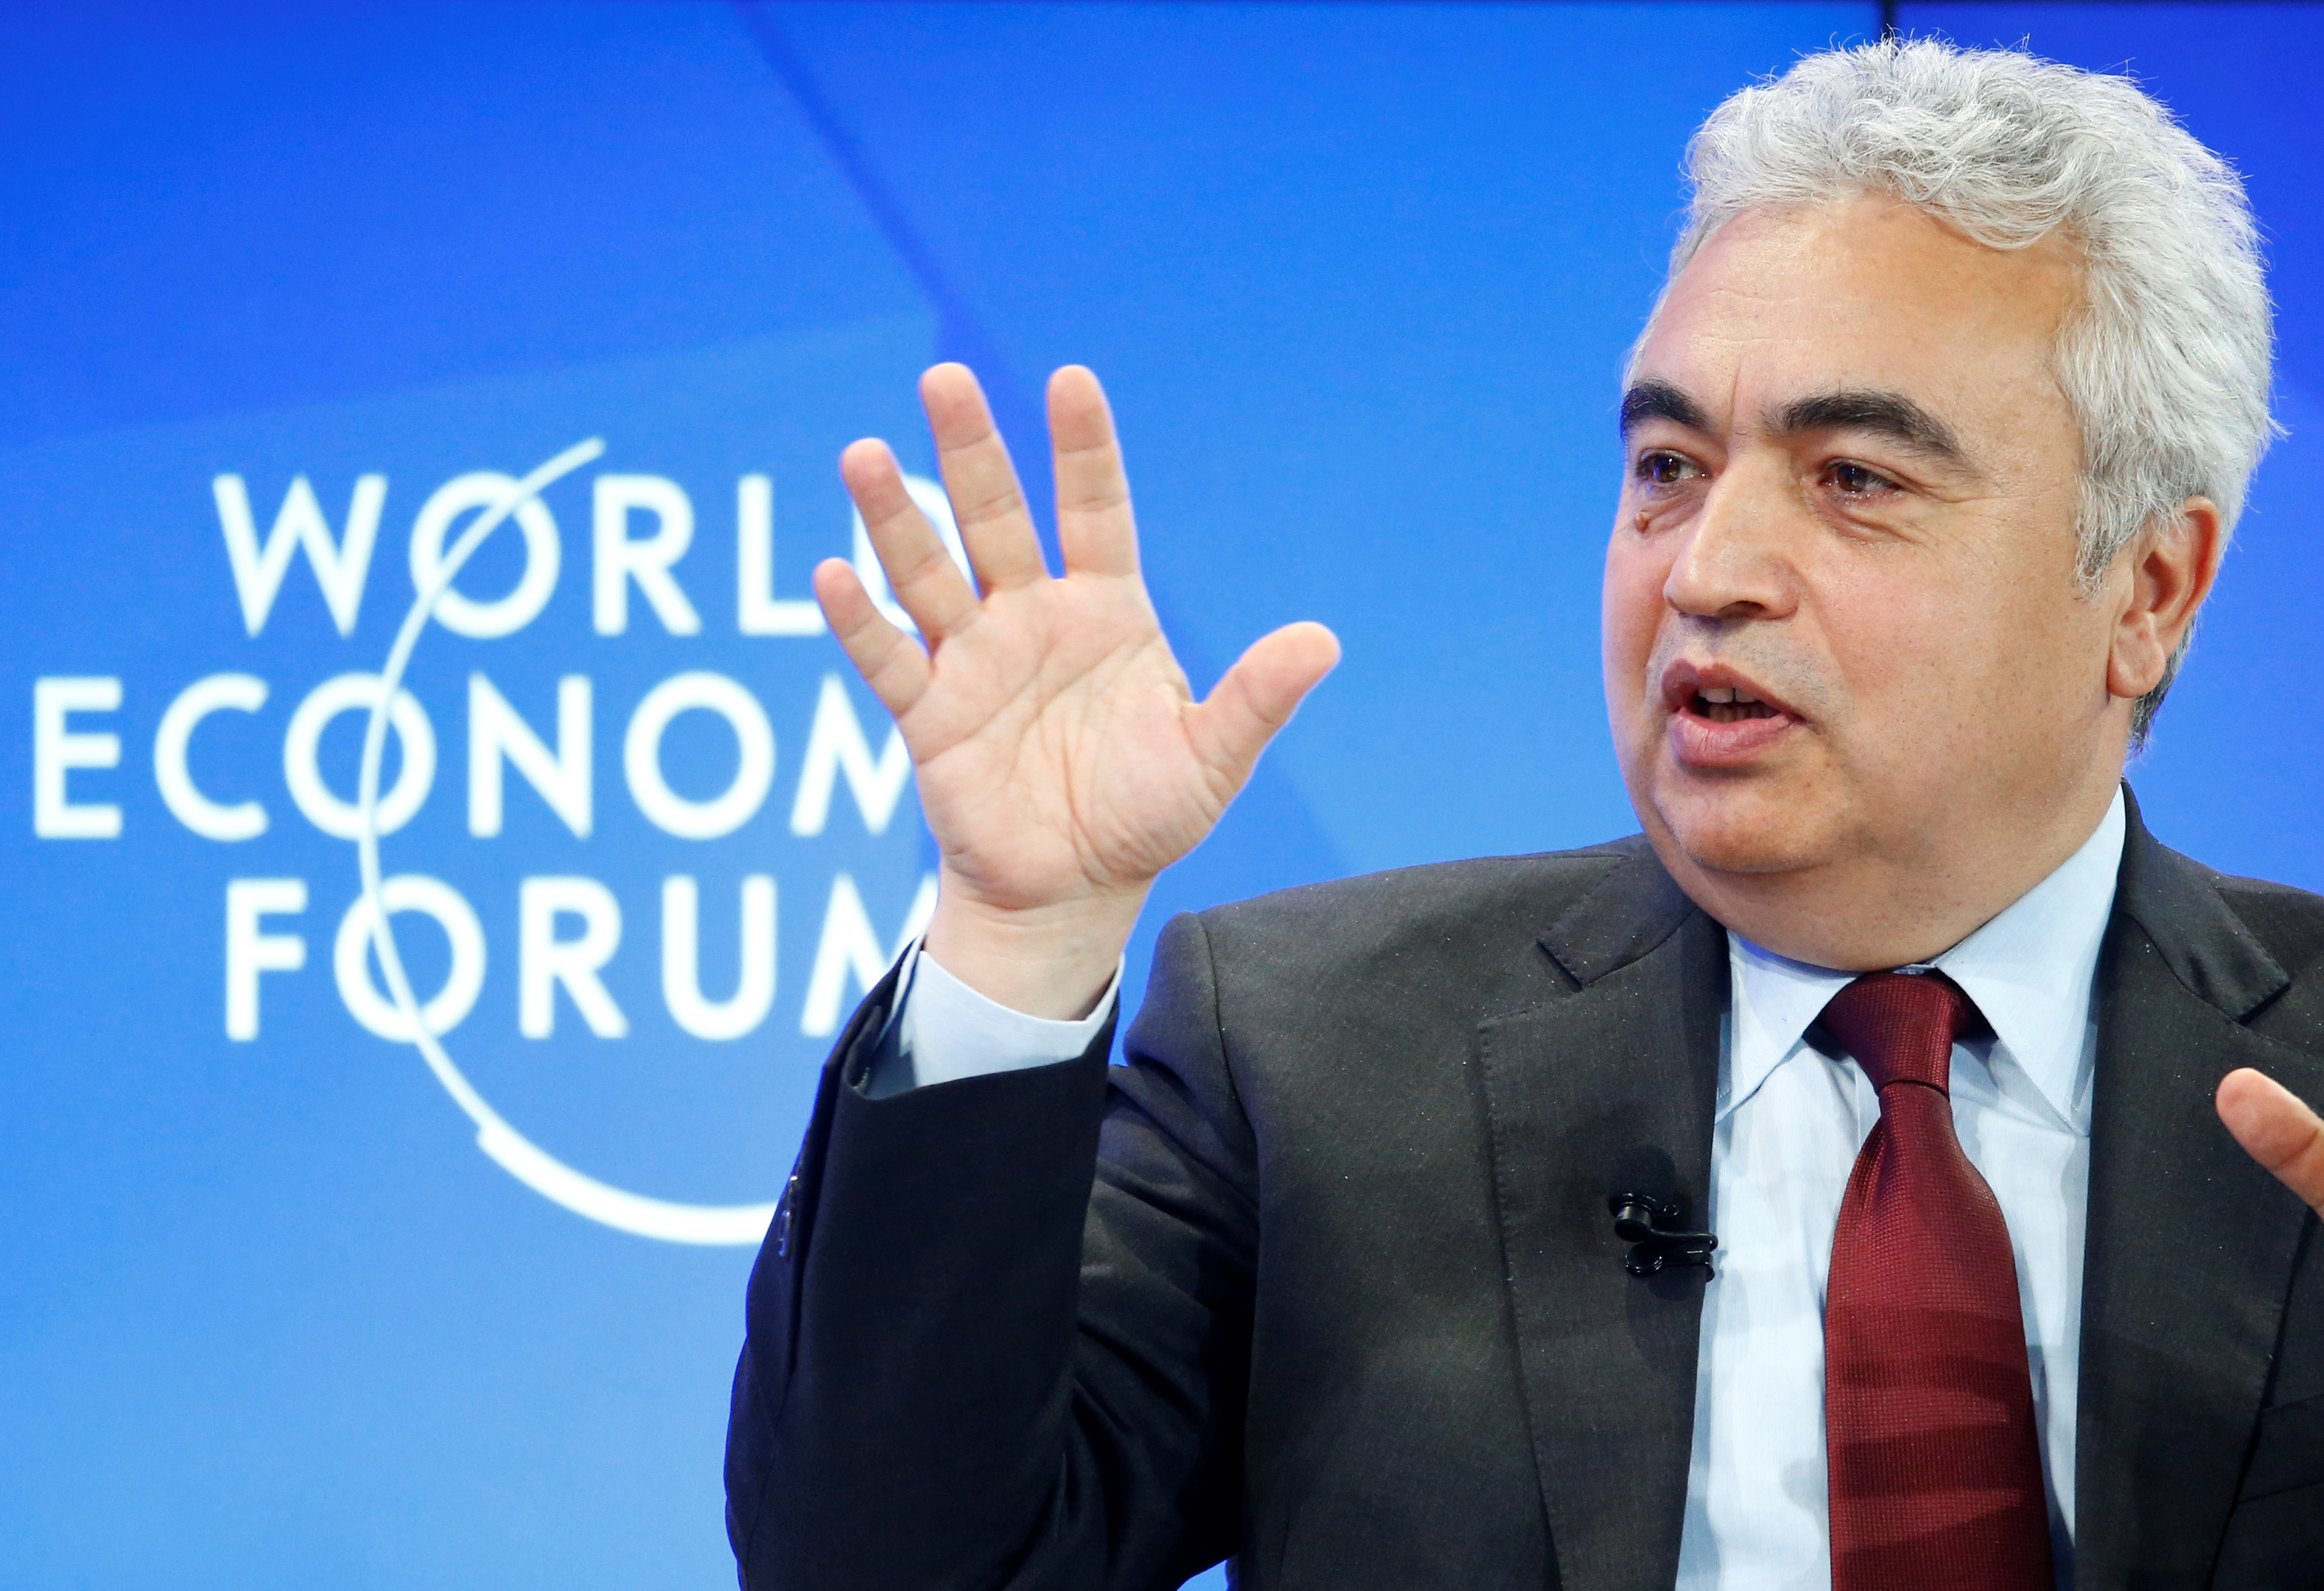 The International Energy Agency's Fatih Birol attends the WEF annual meeting in Davos